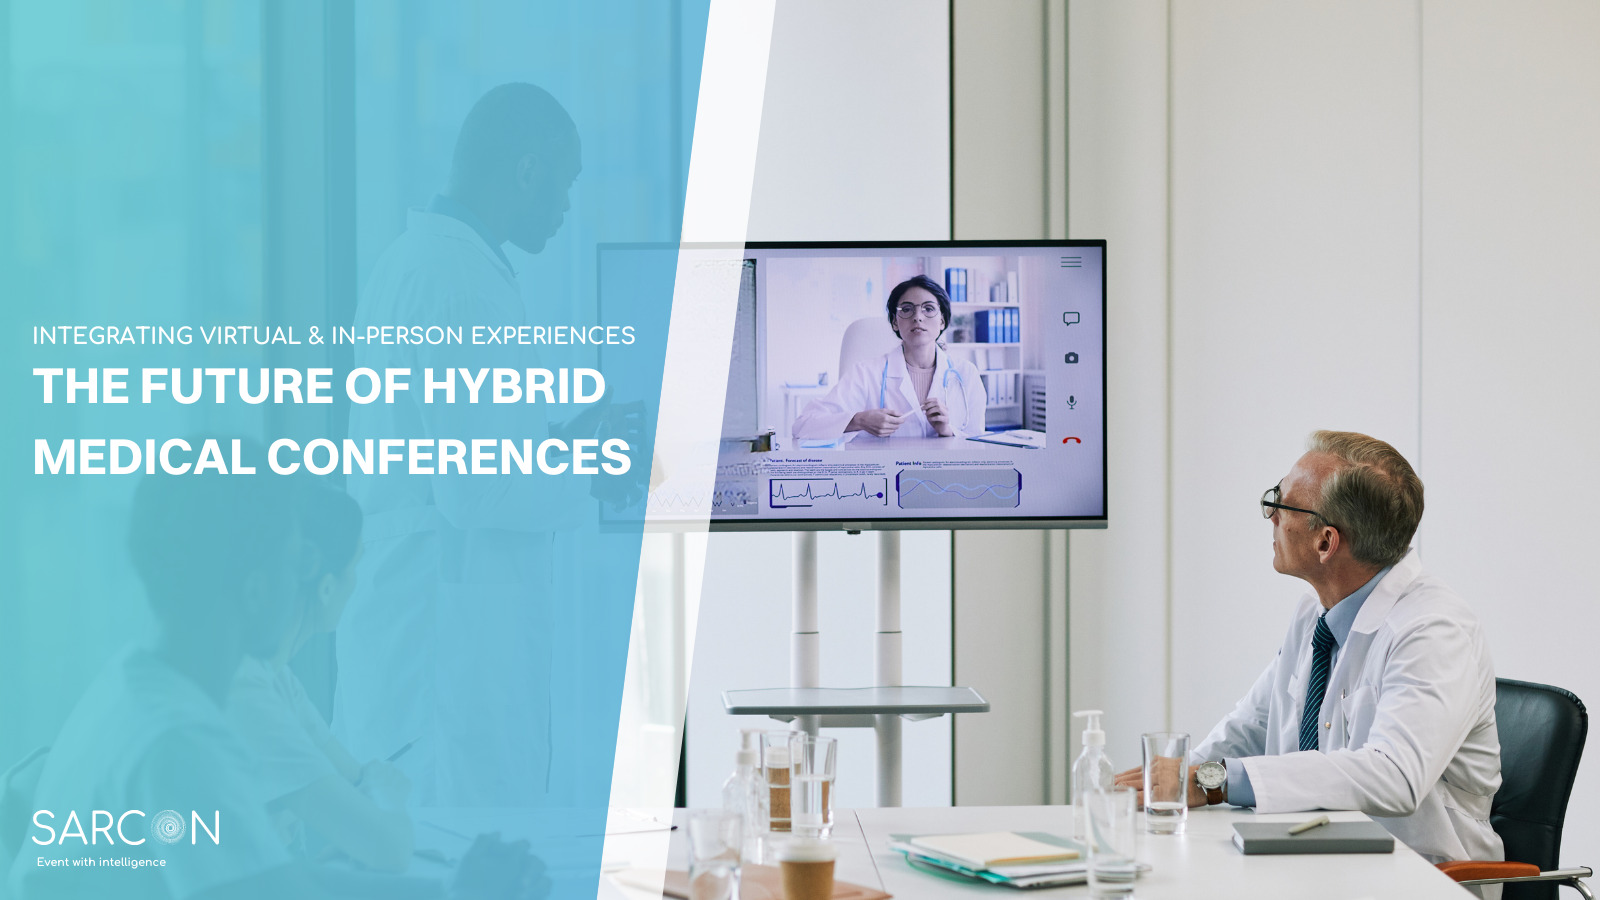 The Future of Hybrid Medical Conferences